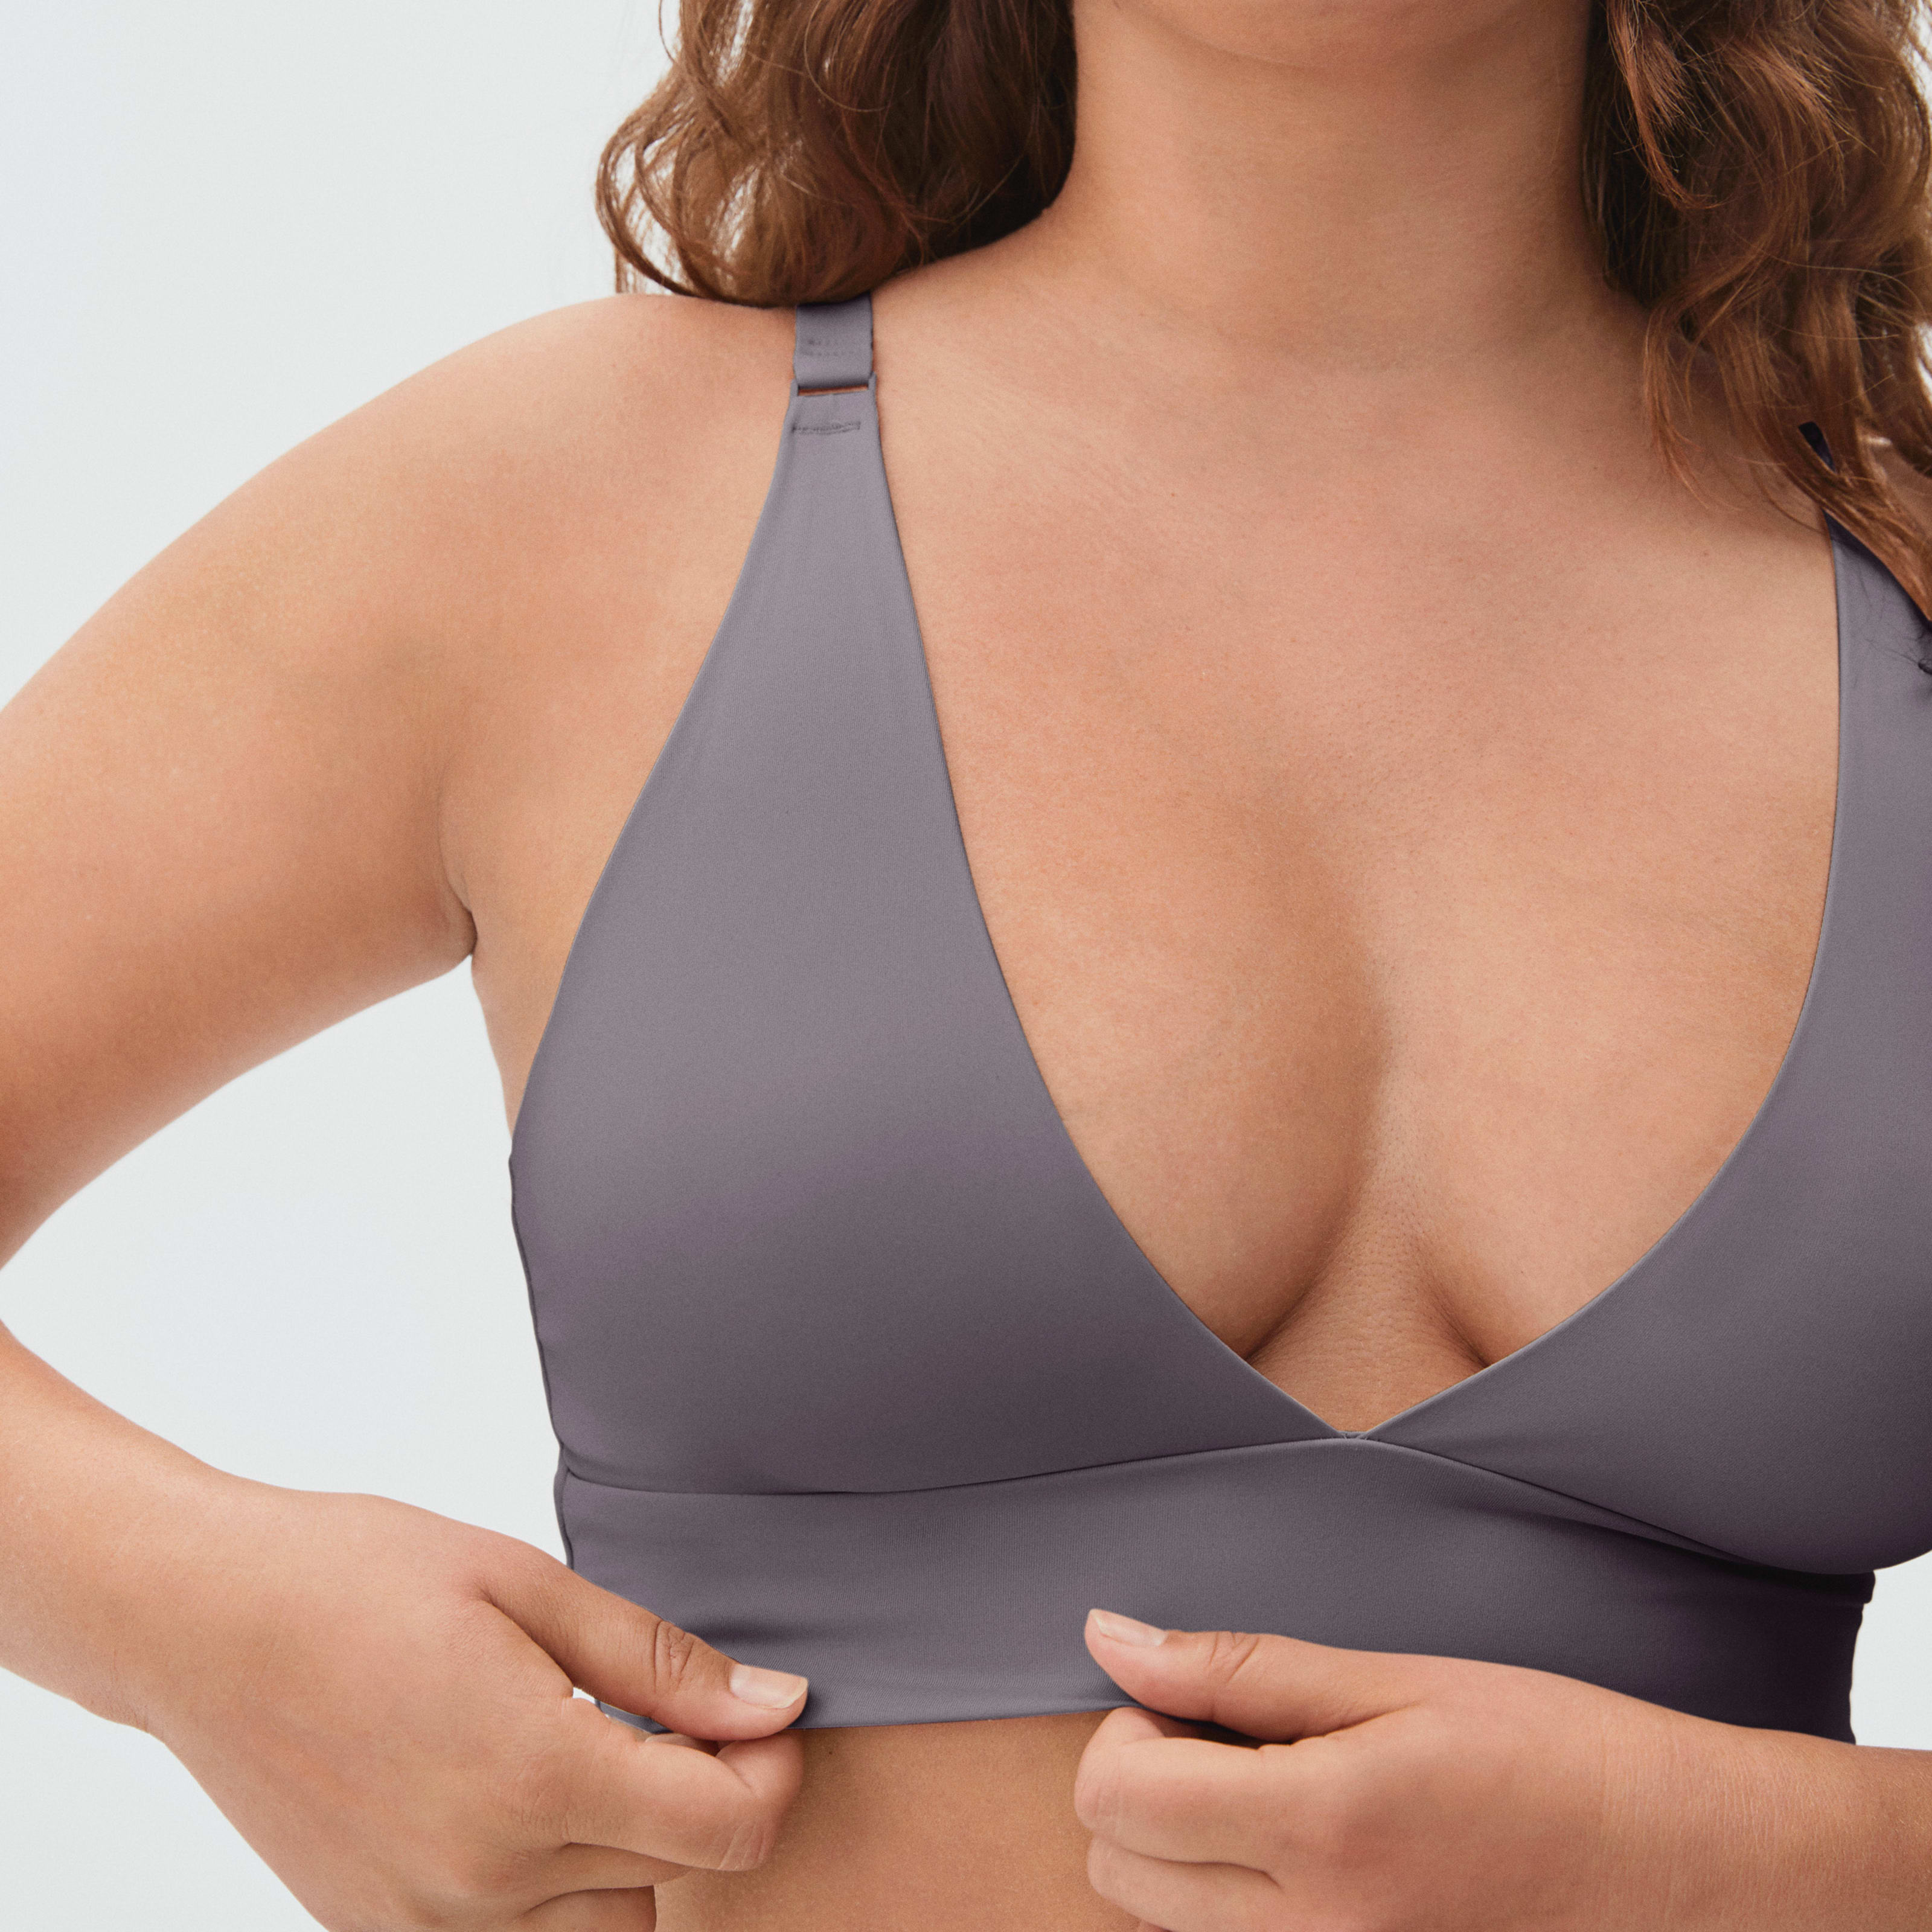 invisible bra by everlane in plum grey, size xxs